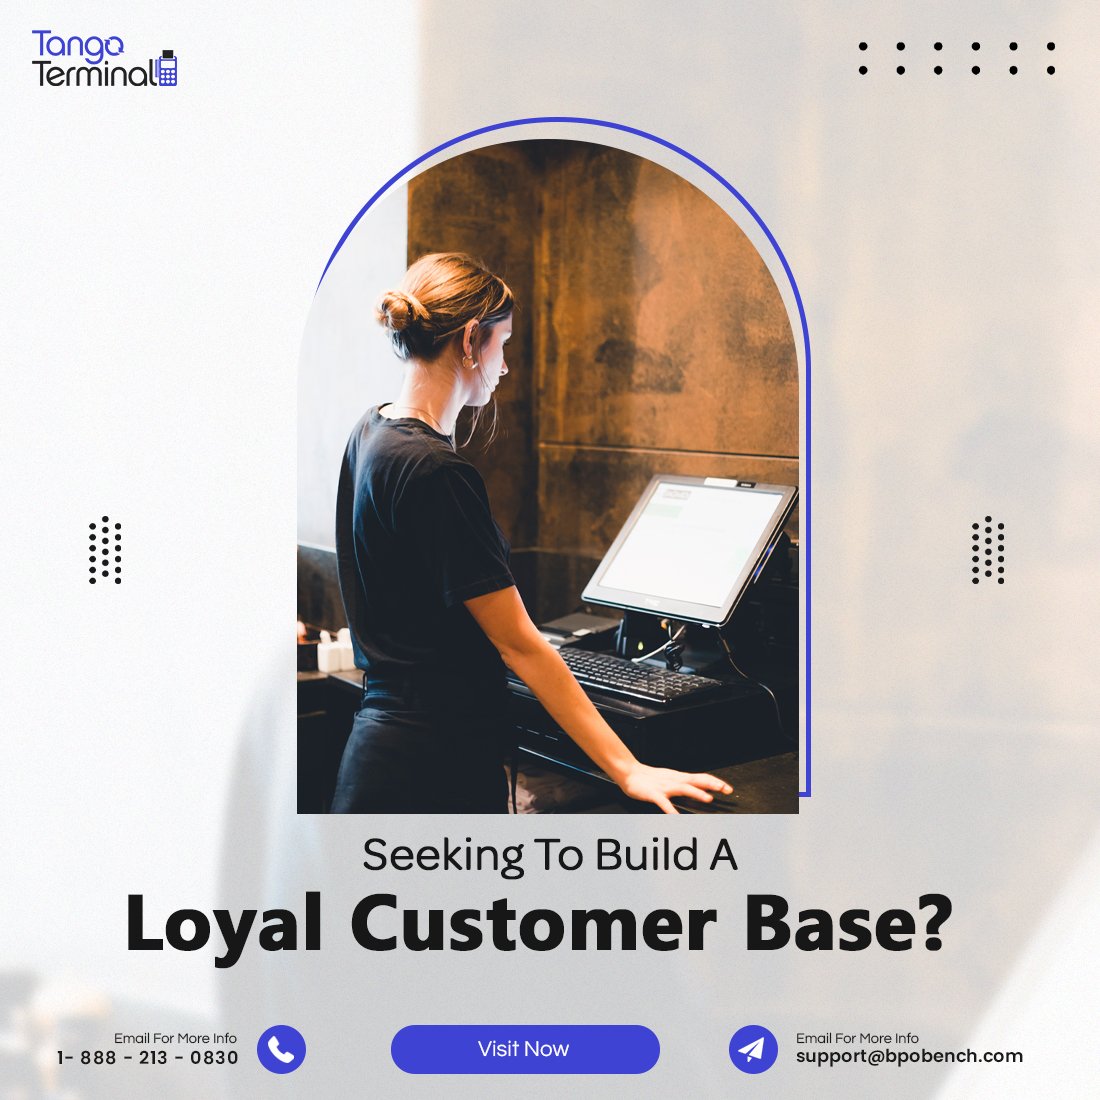 Efficient checkout = Happy customers!
With our POS system, ensure a fast checkout process for maximum satisfaction.

#tangoterminal #customerexperience #pos #retailbusiness #automatingtasks #marketingsolution #ecommerce